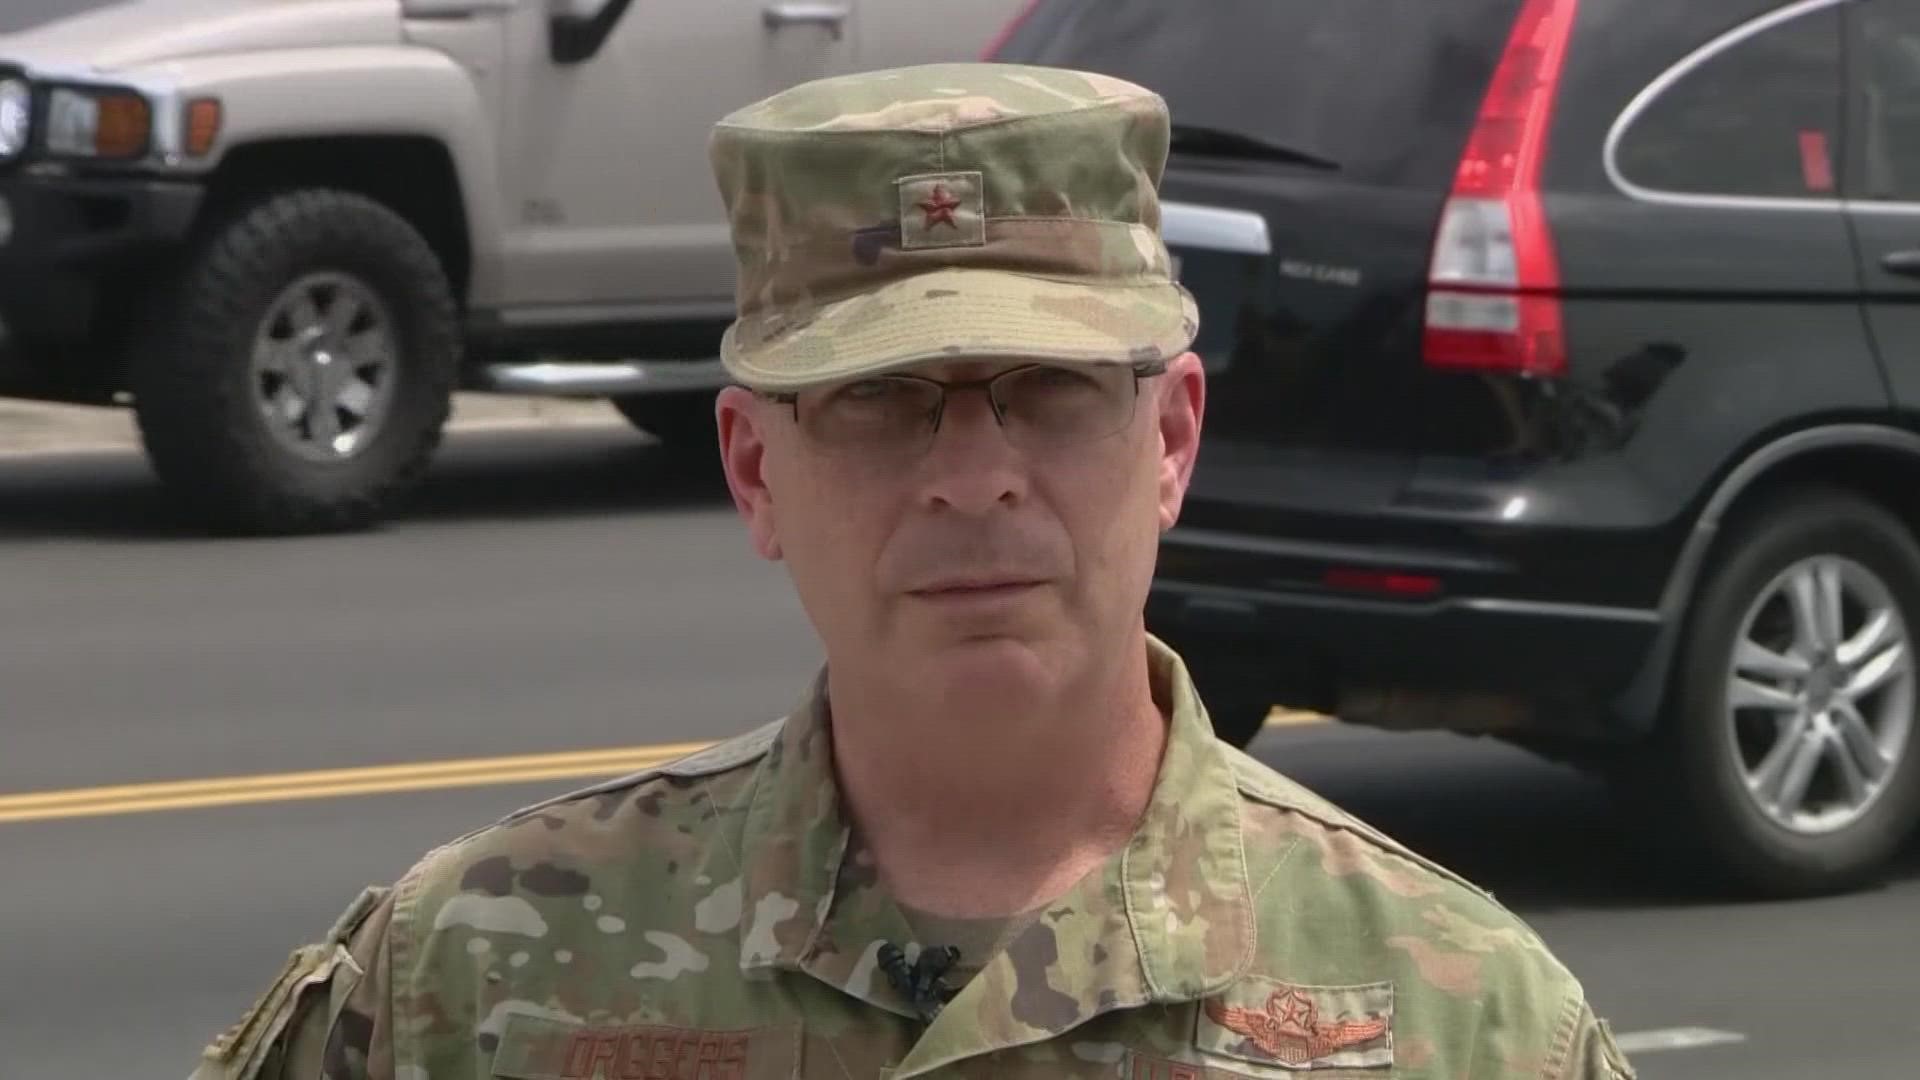 "I'm really proud of the way the team worked together and obviously we'll take this incident and learn from it," said Brig. Gen. Russell D. Driggers.